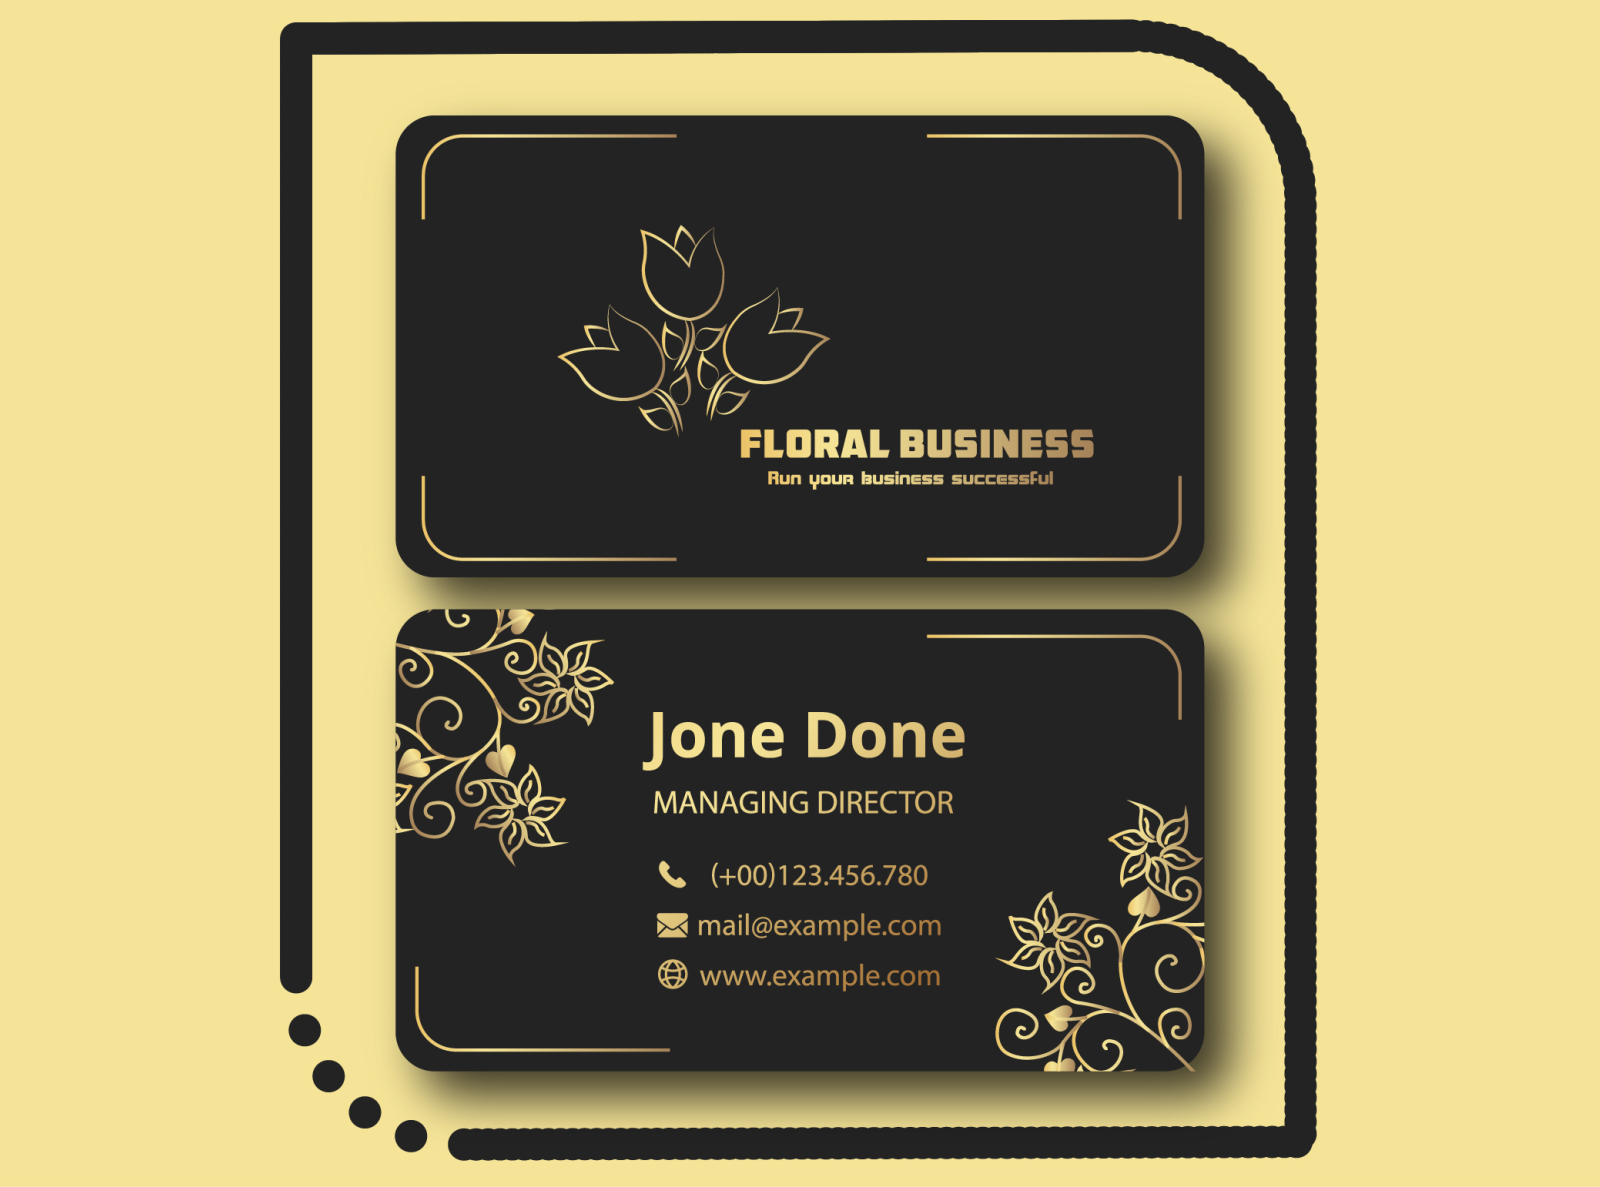 Luxury Business Cards Design by Khaled Saifullah on Dribbble